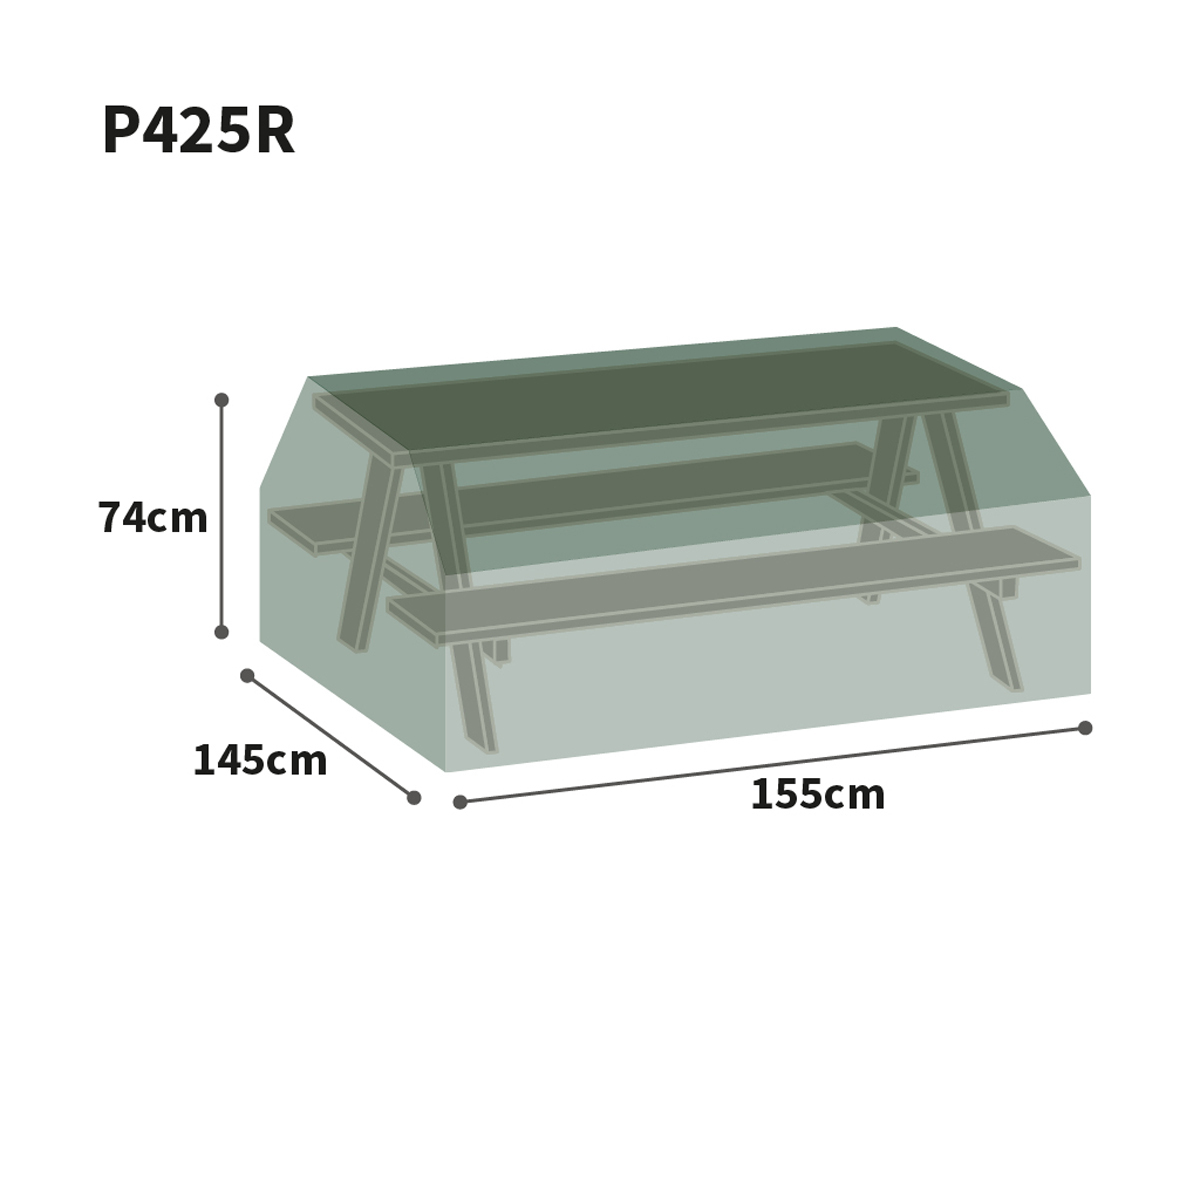 Bosmere Protector Picnic Table Cover Graphic Size Guide